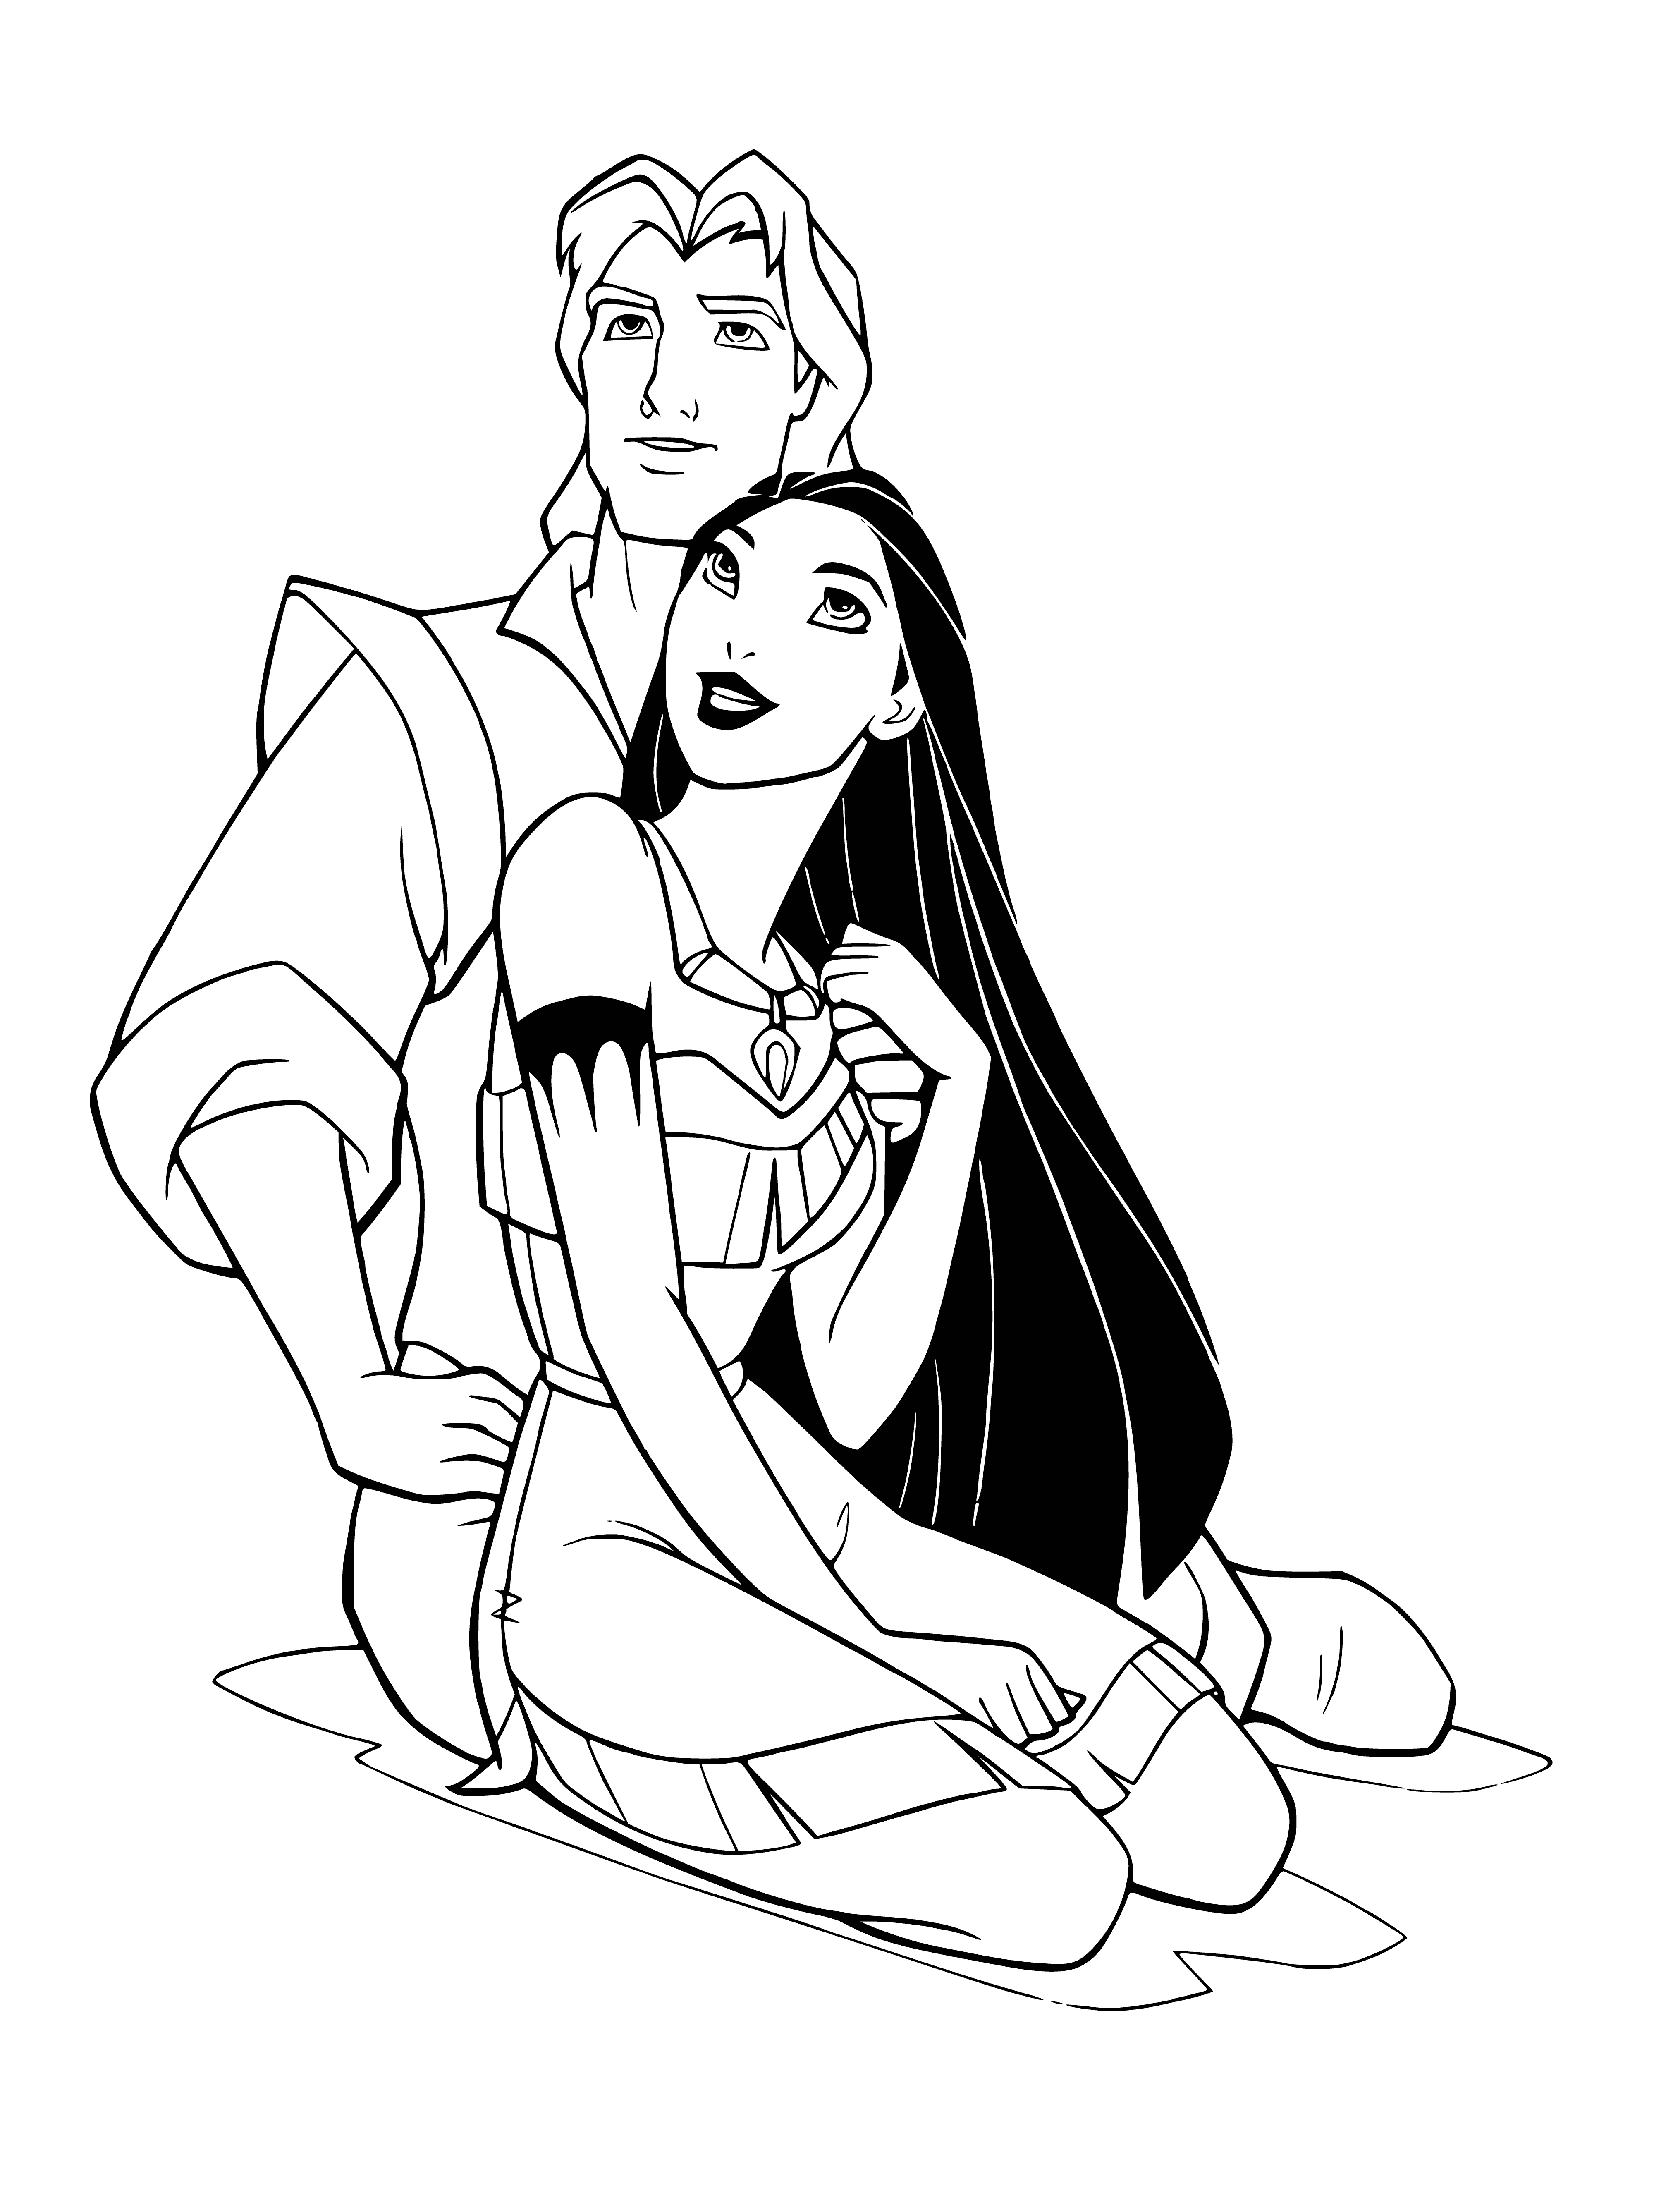 coloring page: John Smith and Pocahontas stand together, him holding a gun and her a feather, both in contemporary dress.